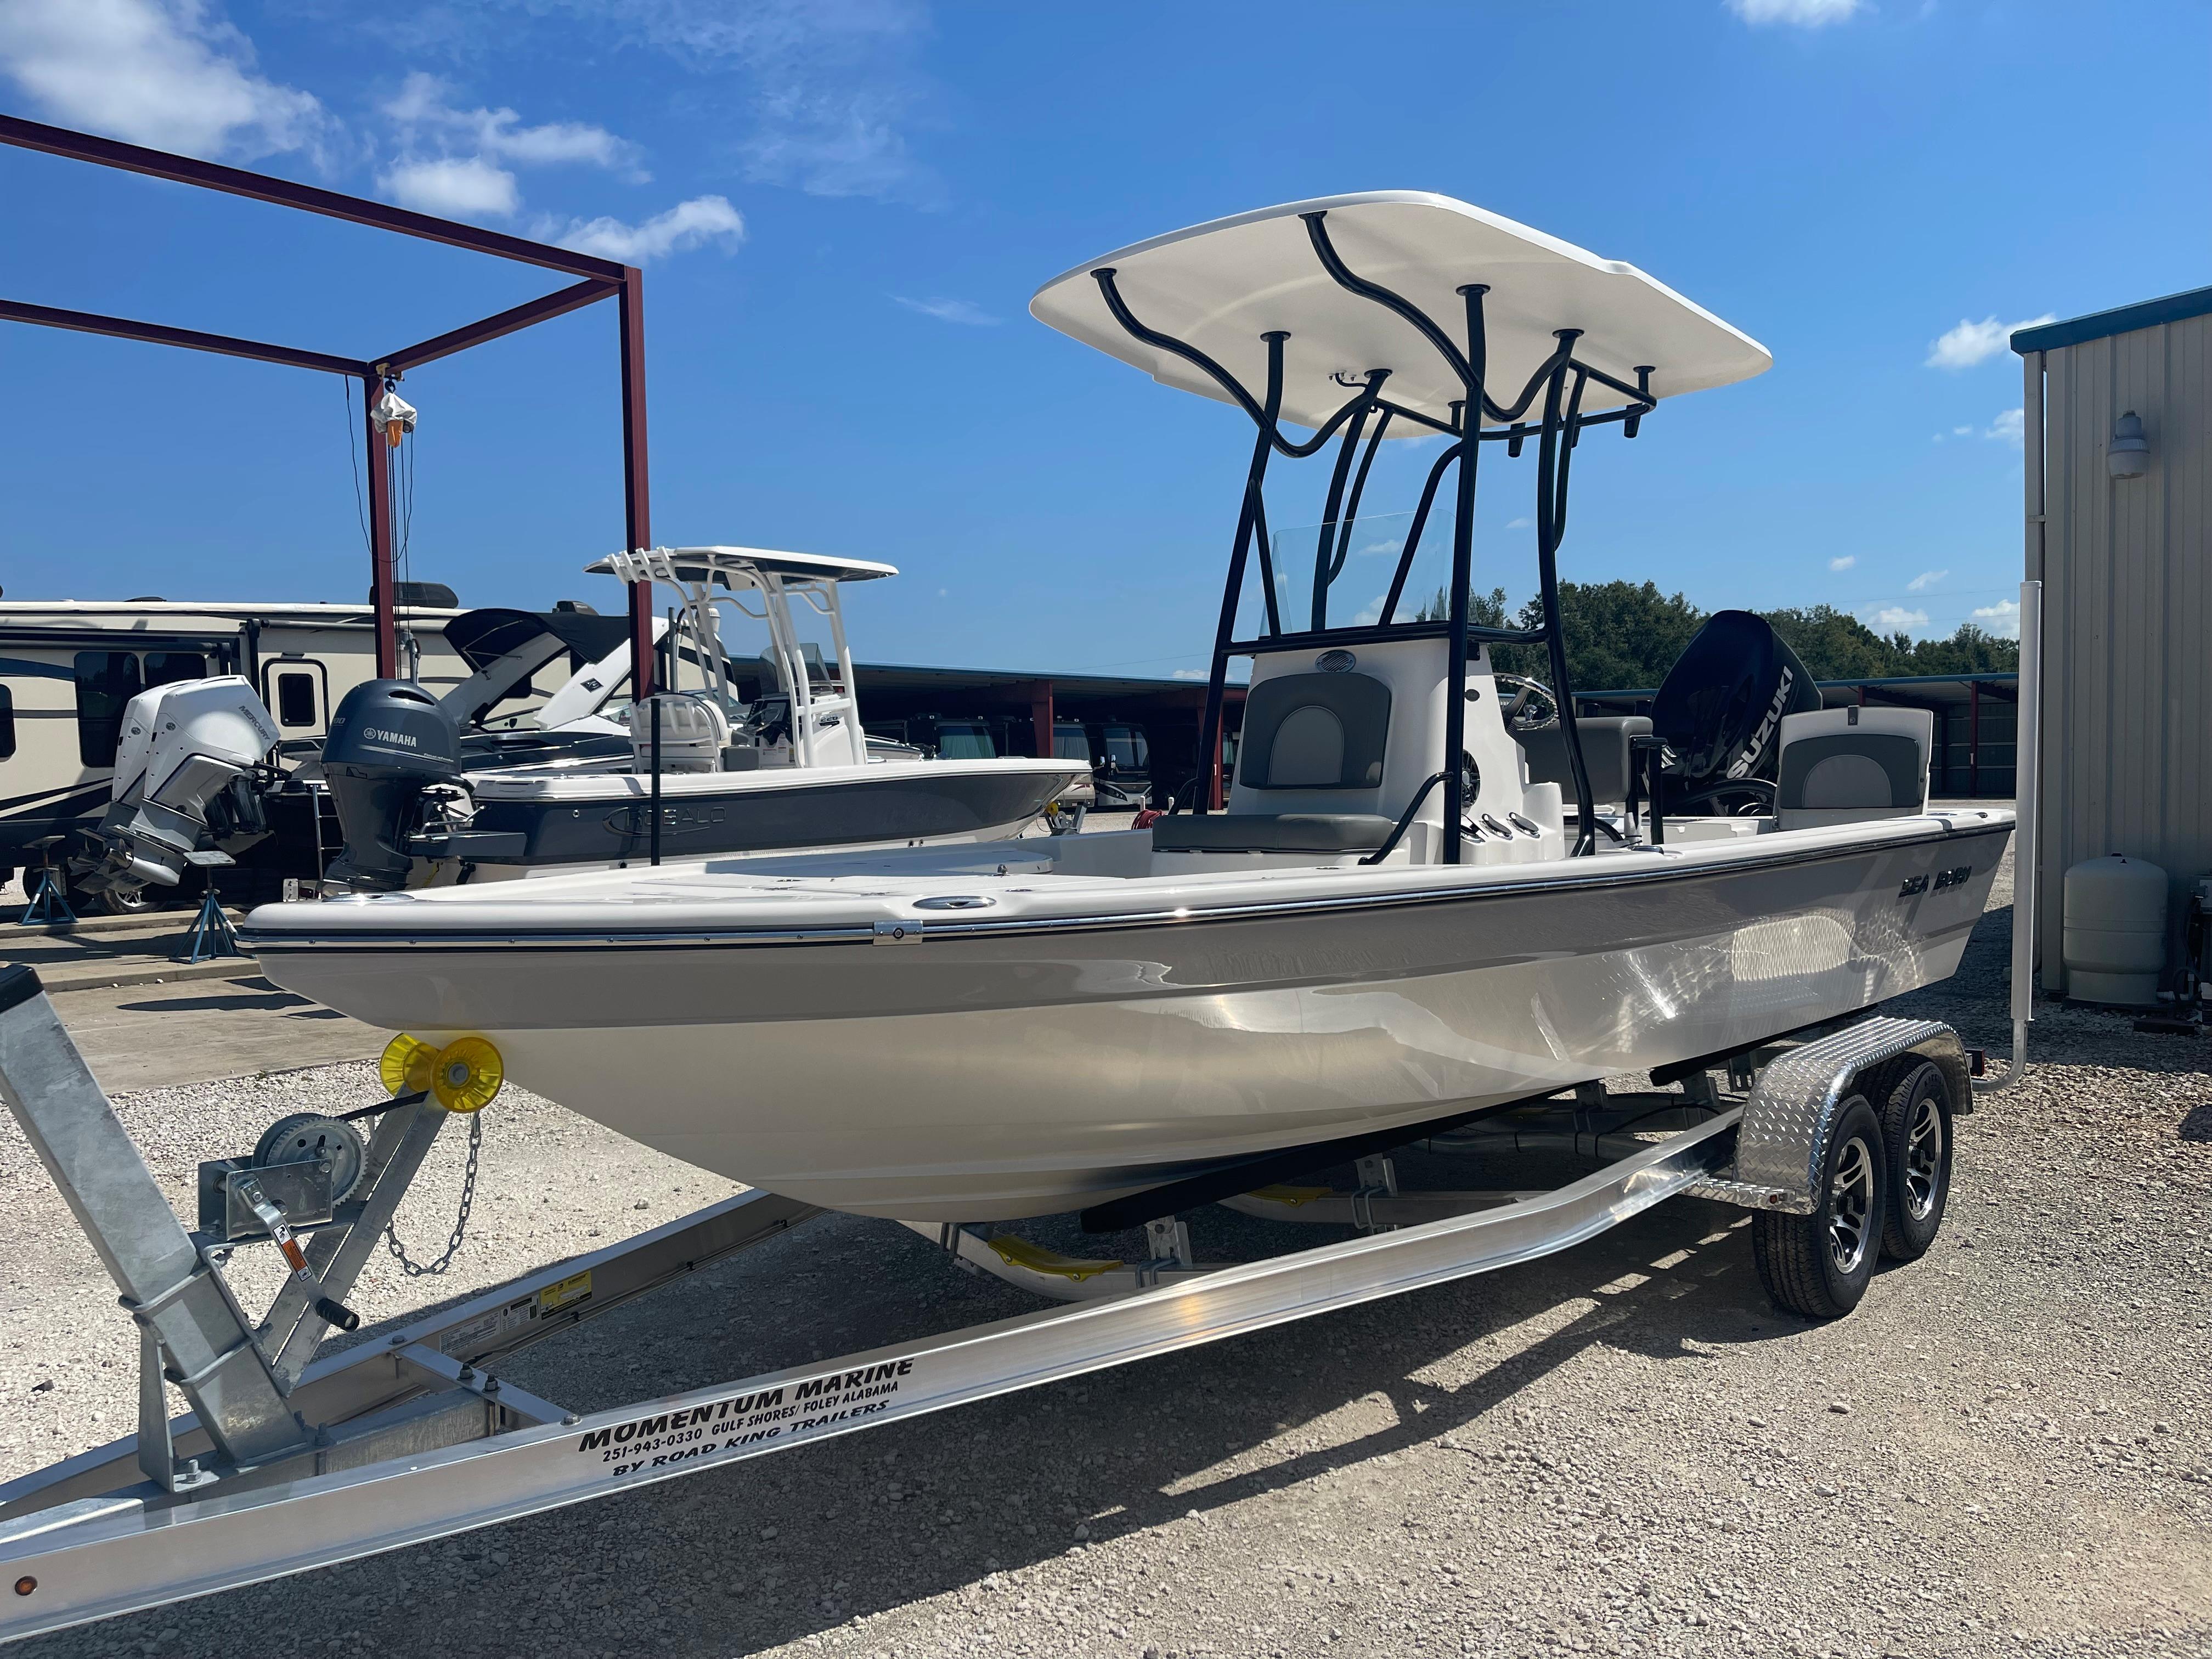 FX21 Bay - Bay Boats, Center Consoles, & Offshore Boats